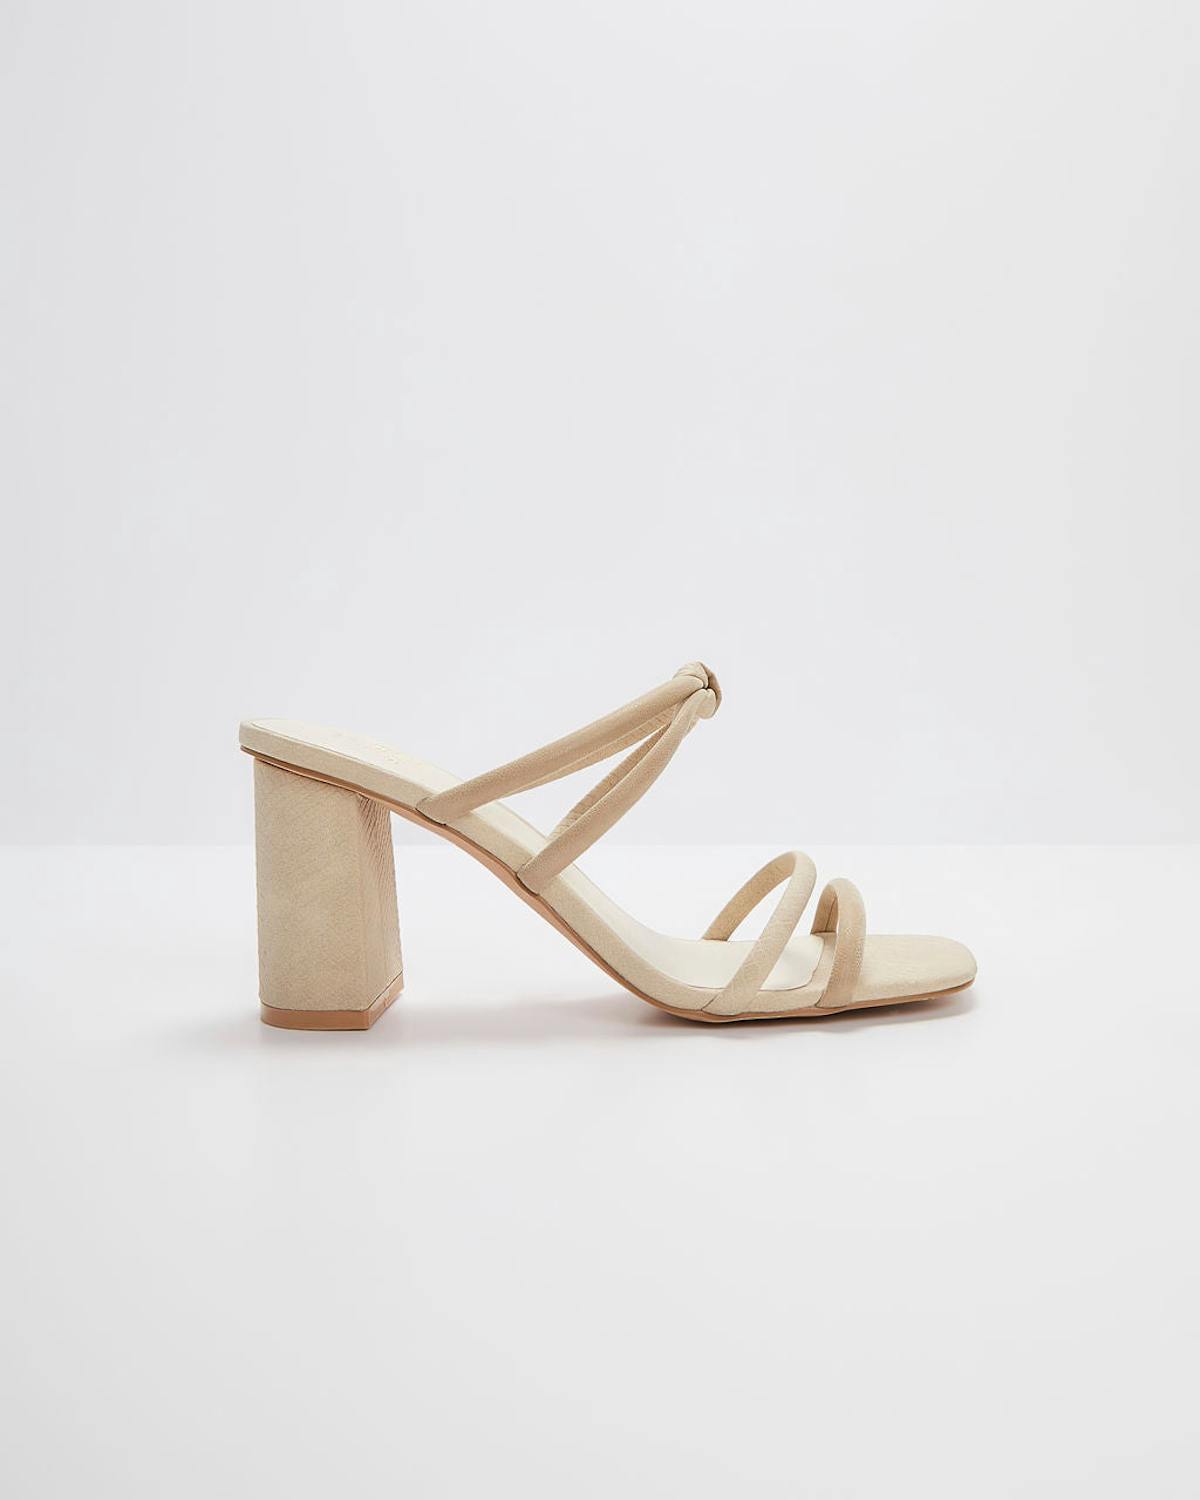 Sawyer Faux Suede Strappy Heels - Taupe view 1